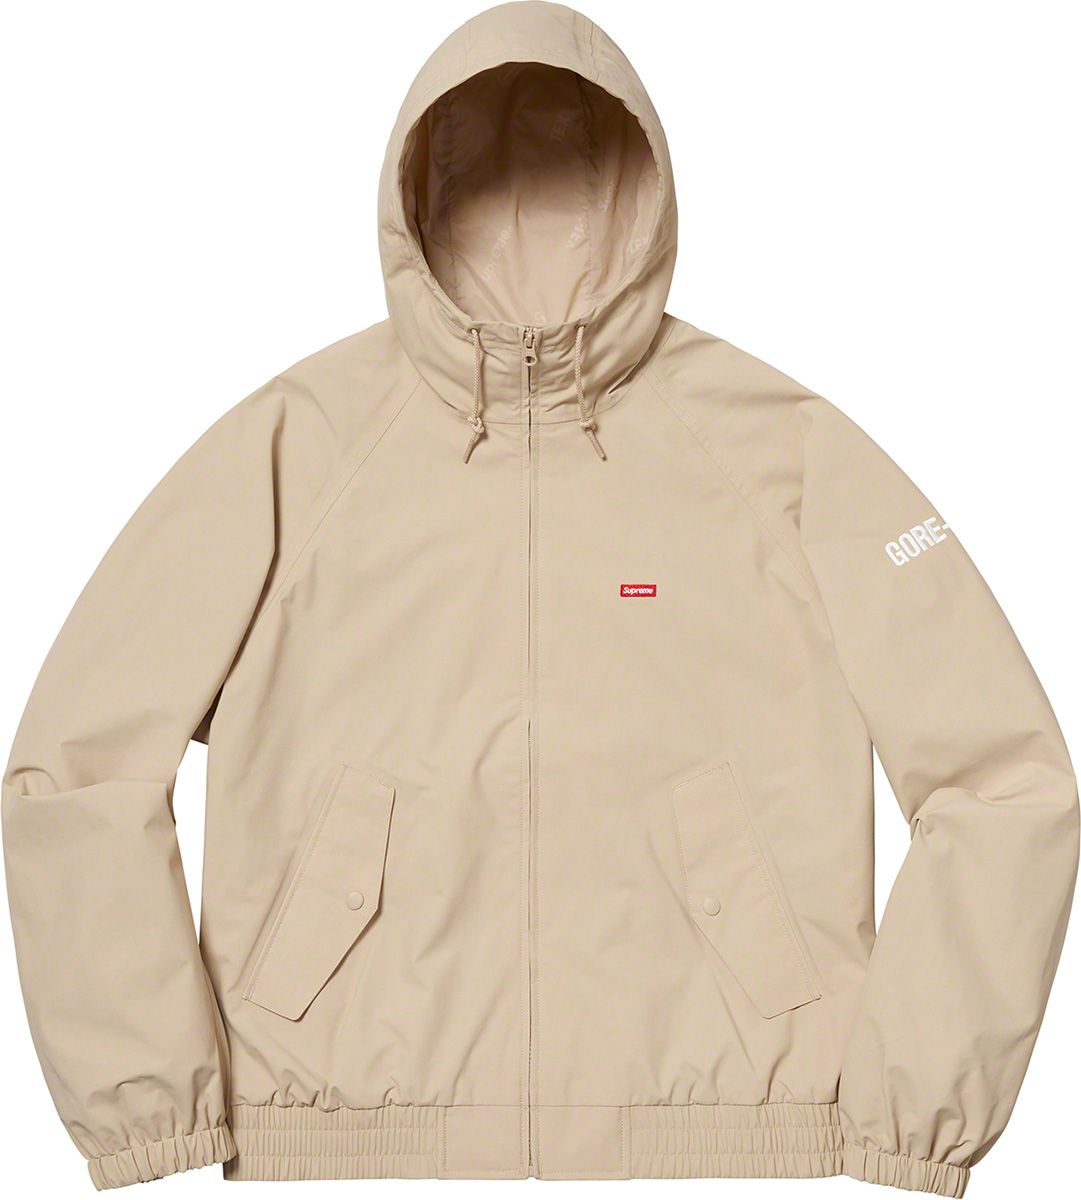 GORE-TEX Hooded Harrington Jacket - Spring/Summer 2019 Preview